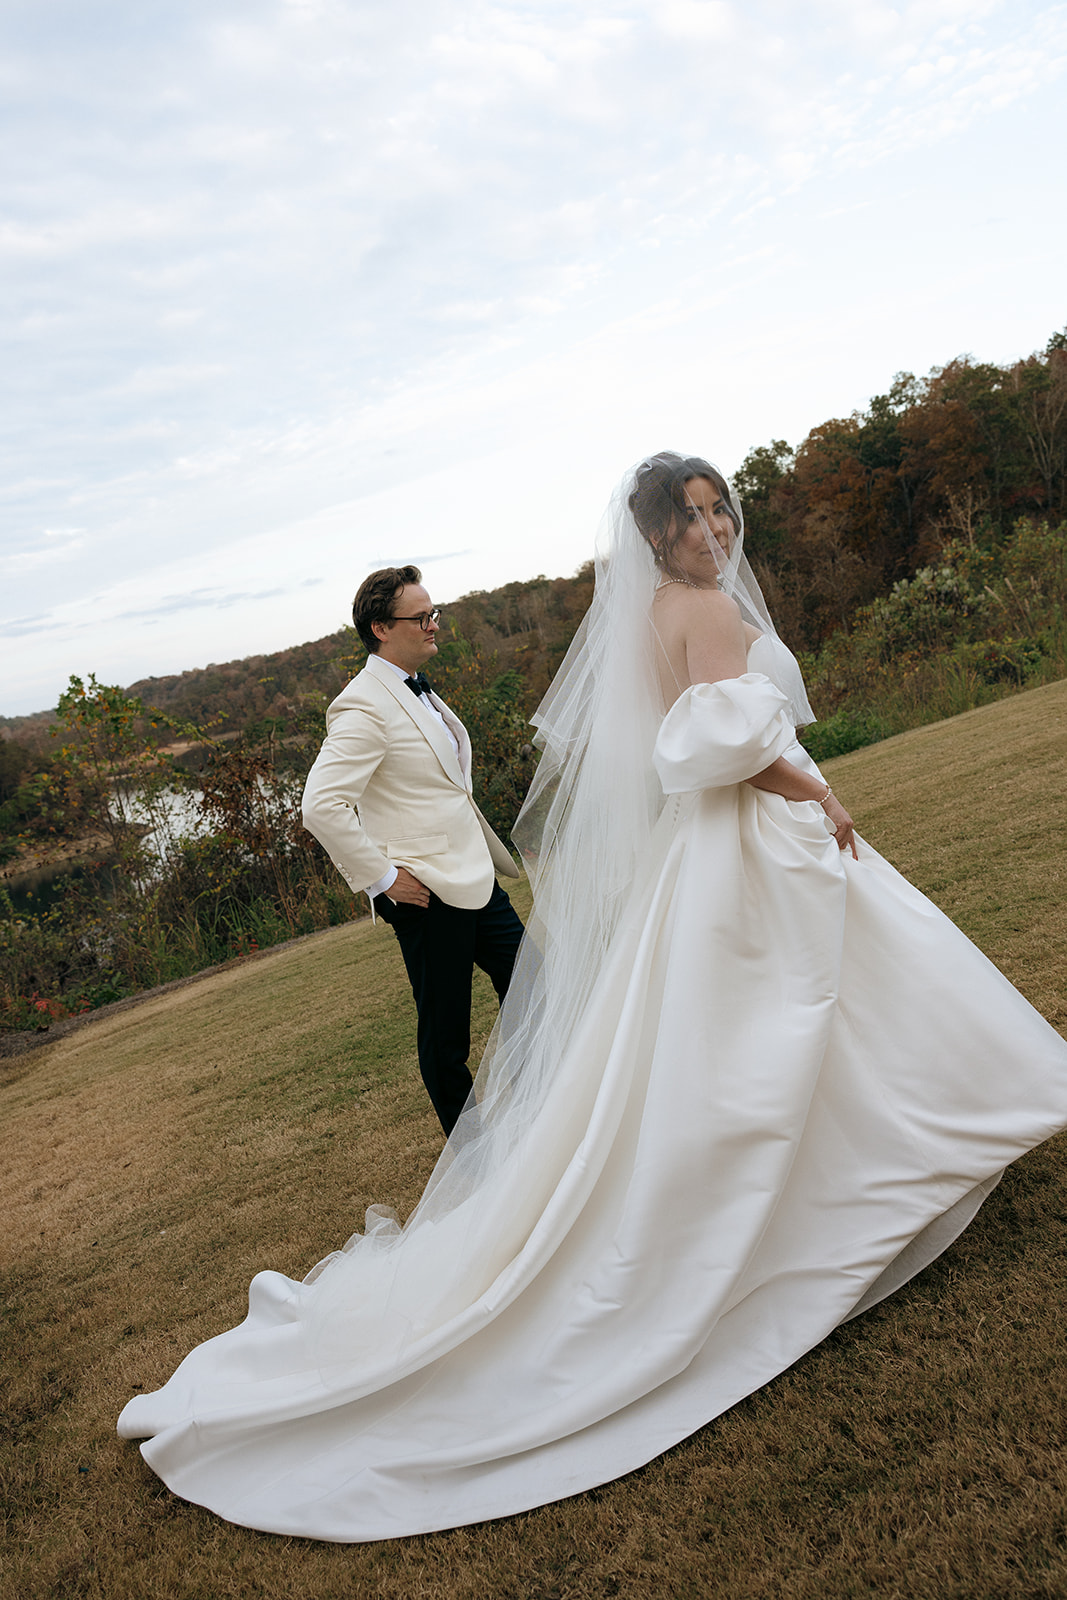 A couple walk together during wedding portraits at The Barn at Smith Lake in Alabama